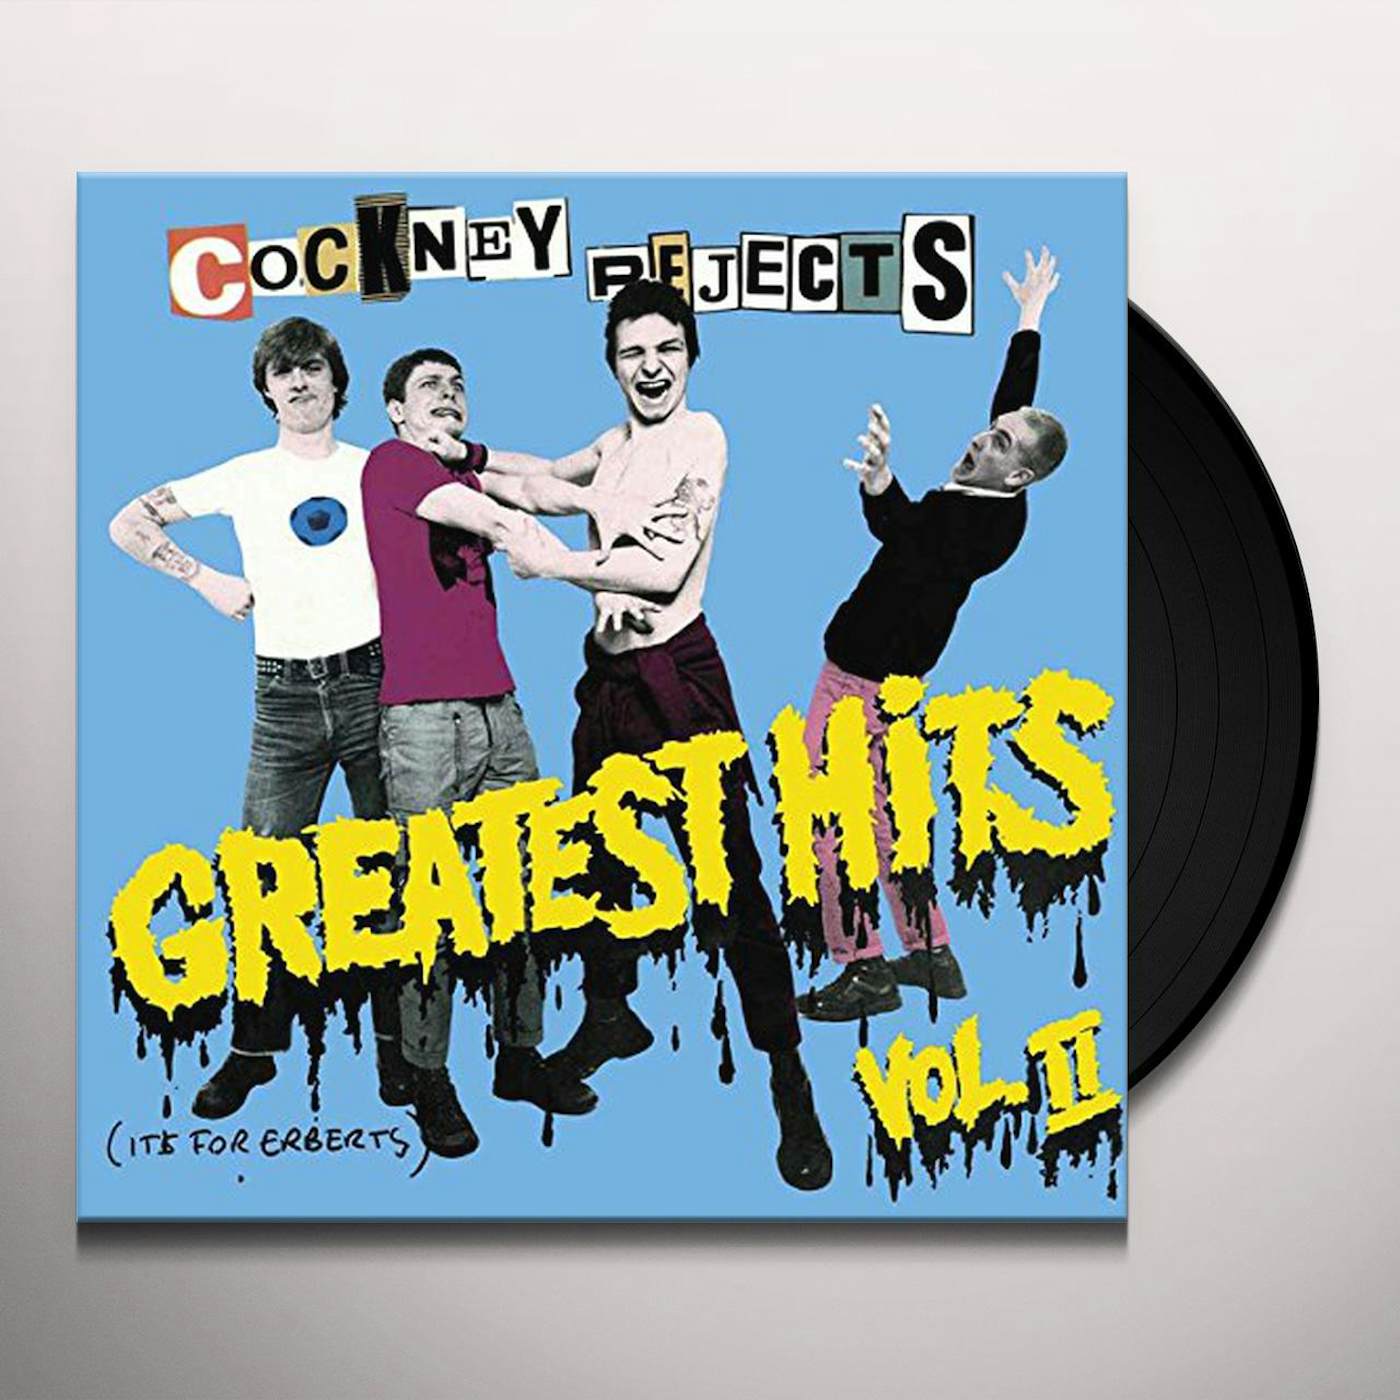 Cockney Rejects GREATEST HITS VOL 2 Vinyl Record